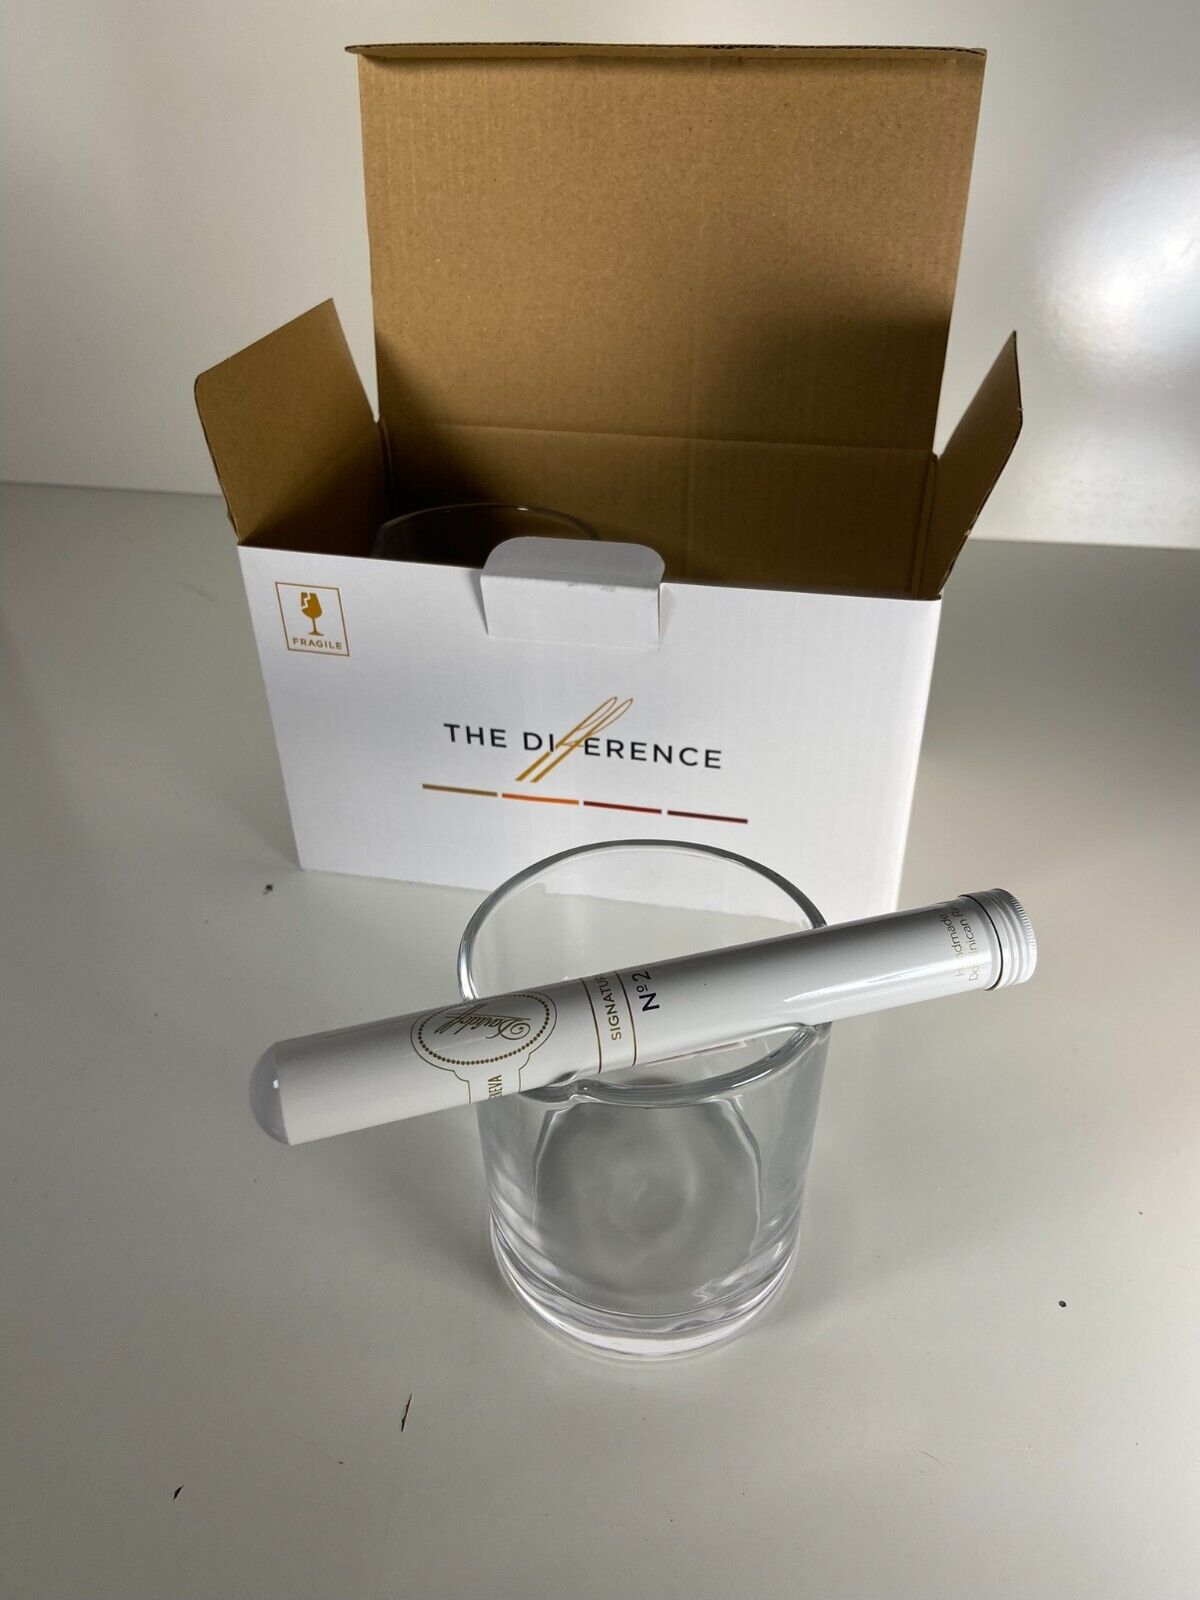 Davidoff Glasses with Cigar holder- Cigar NOT included